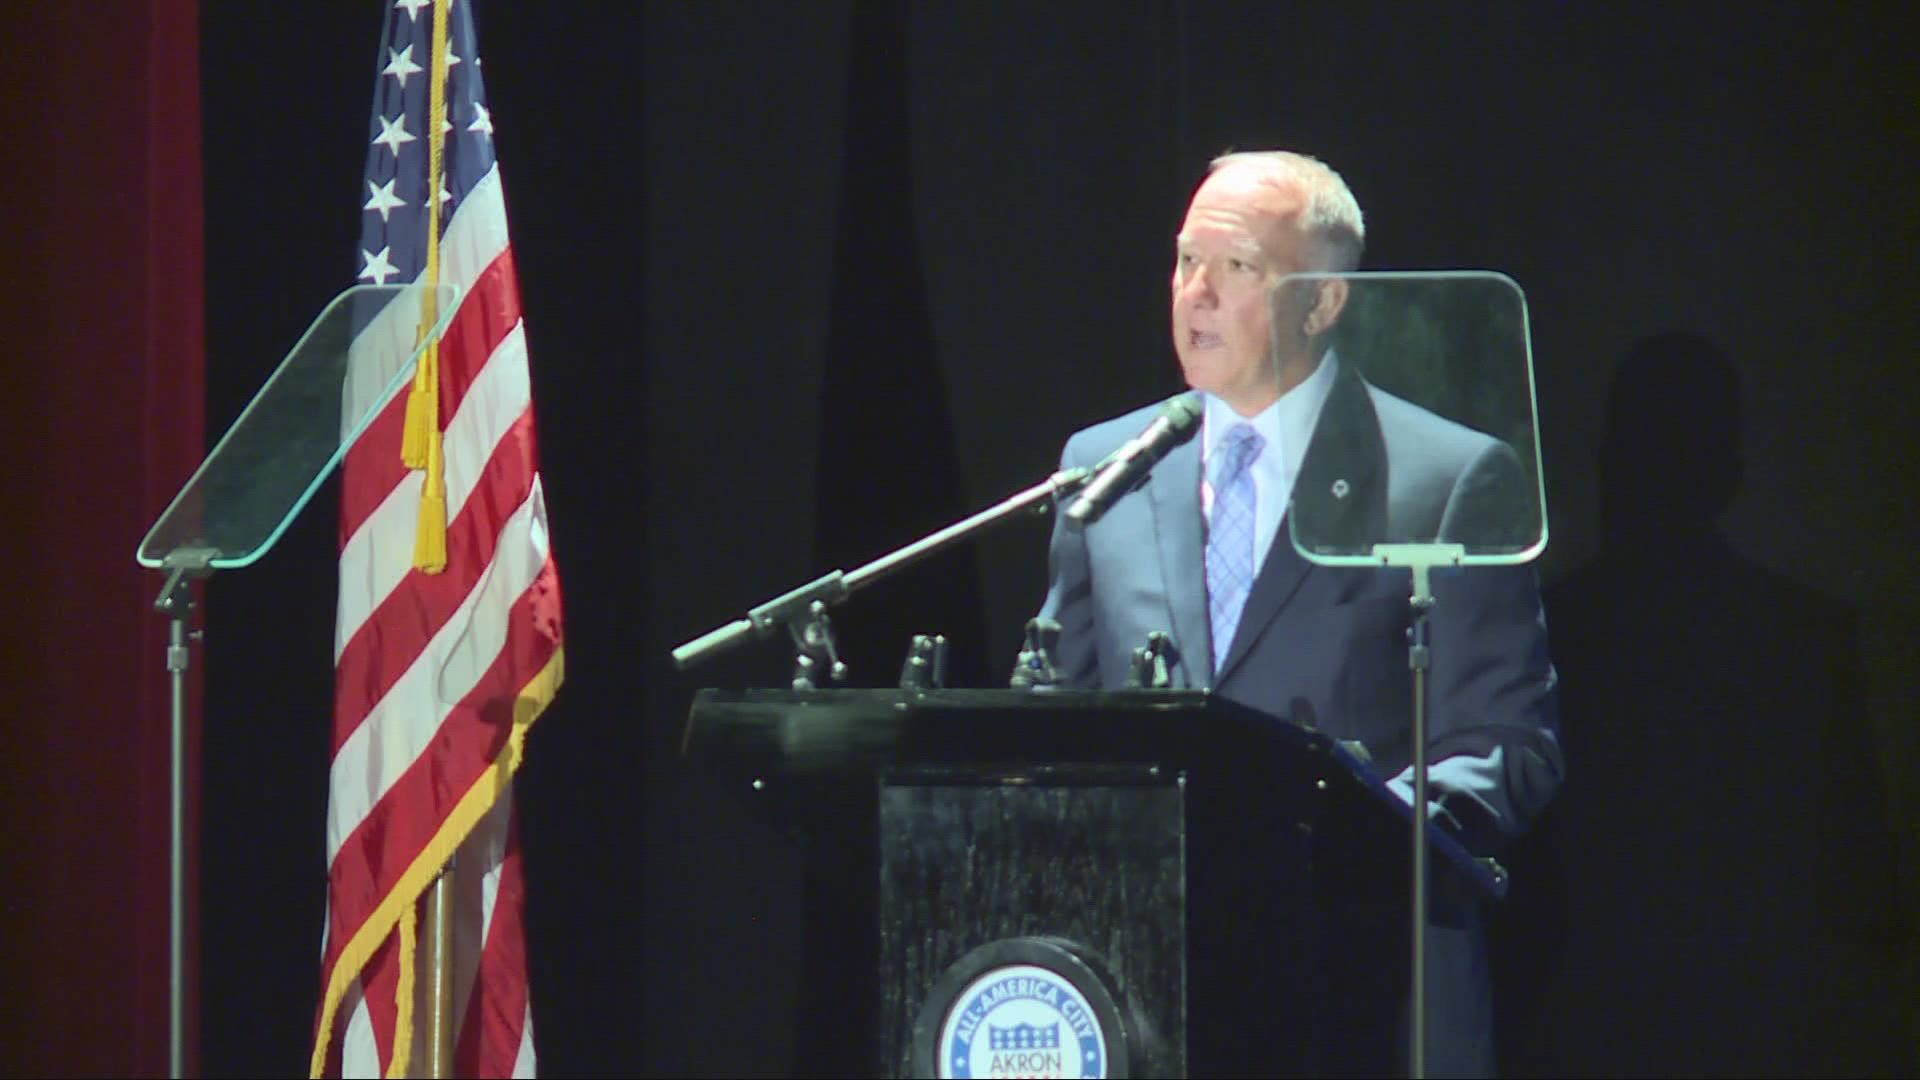 'My reasons are my own, and they are without regret,' Horrigan said in a statement. 'It is the honor of my professional lifetime to serve as Akron’s 62nd mayor.'